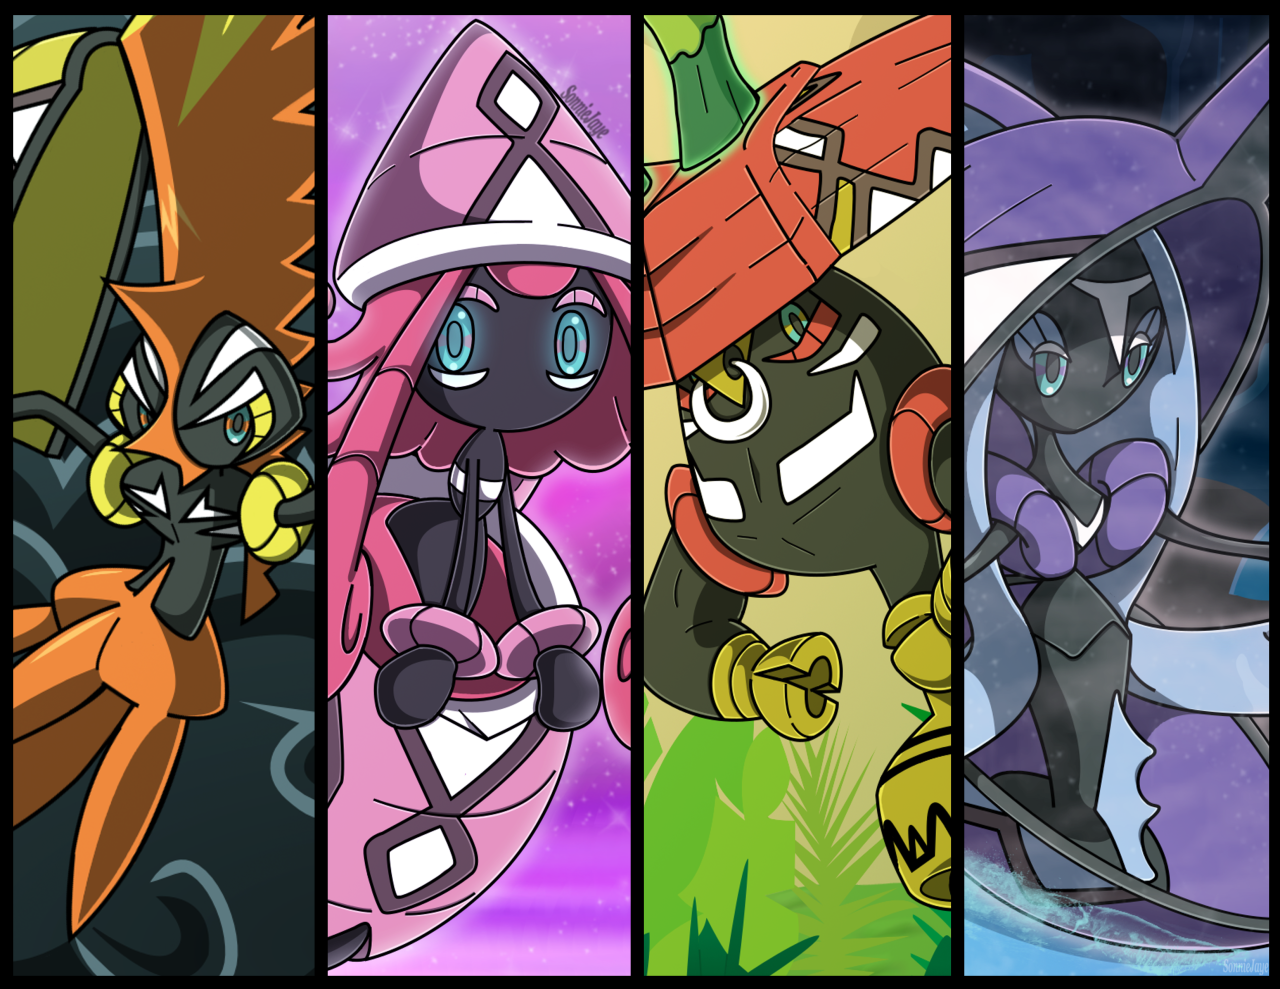 A Wallpaper For All The Tapu I've Drawn - Tapu Pokemon , HD Wallpaper & Backgrounds